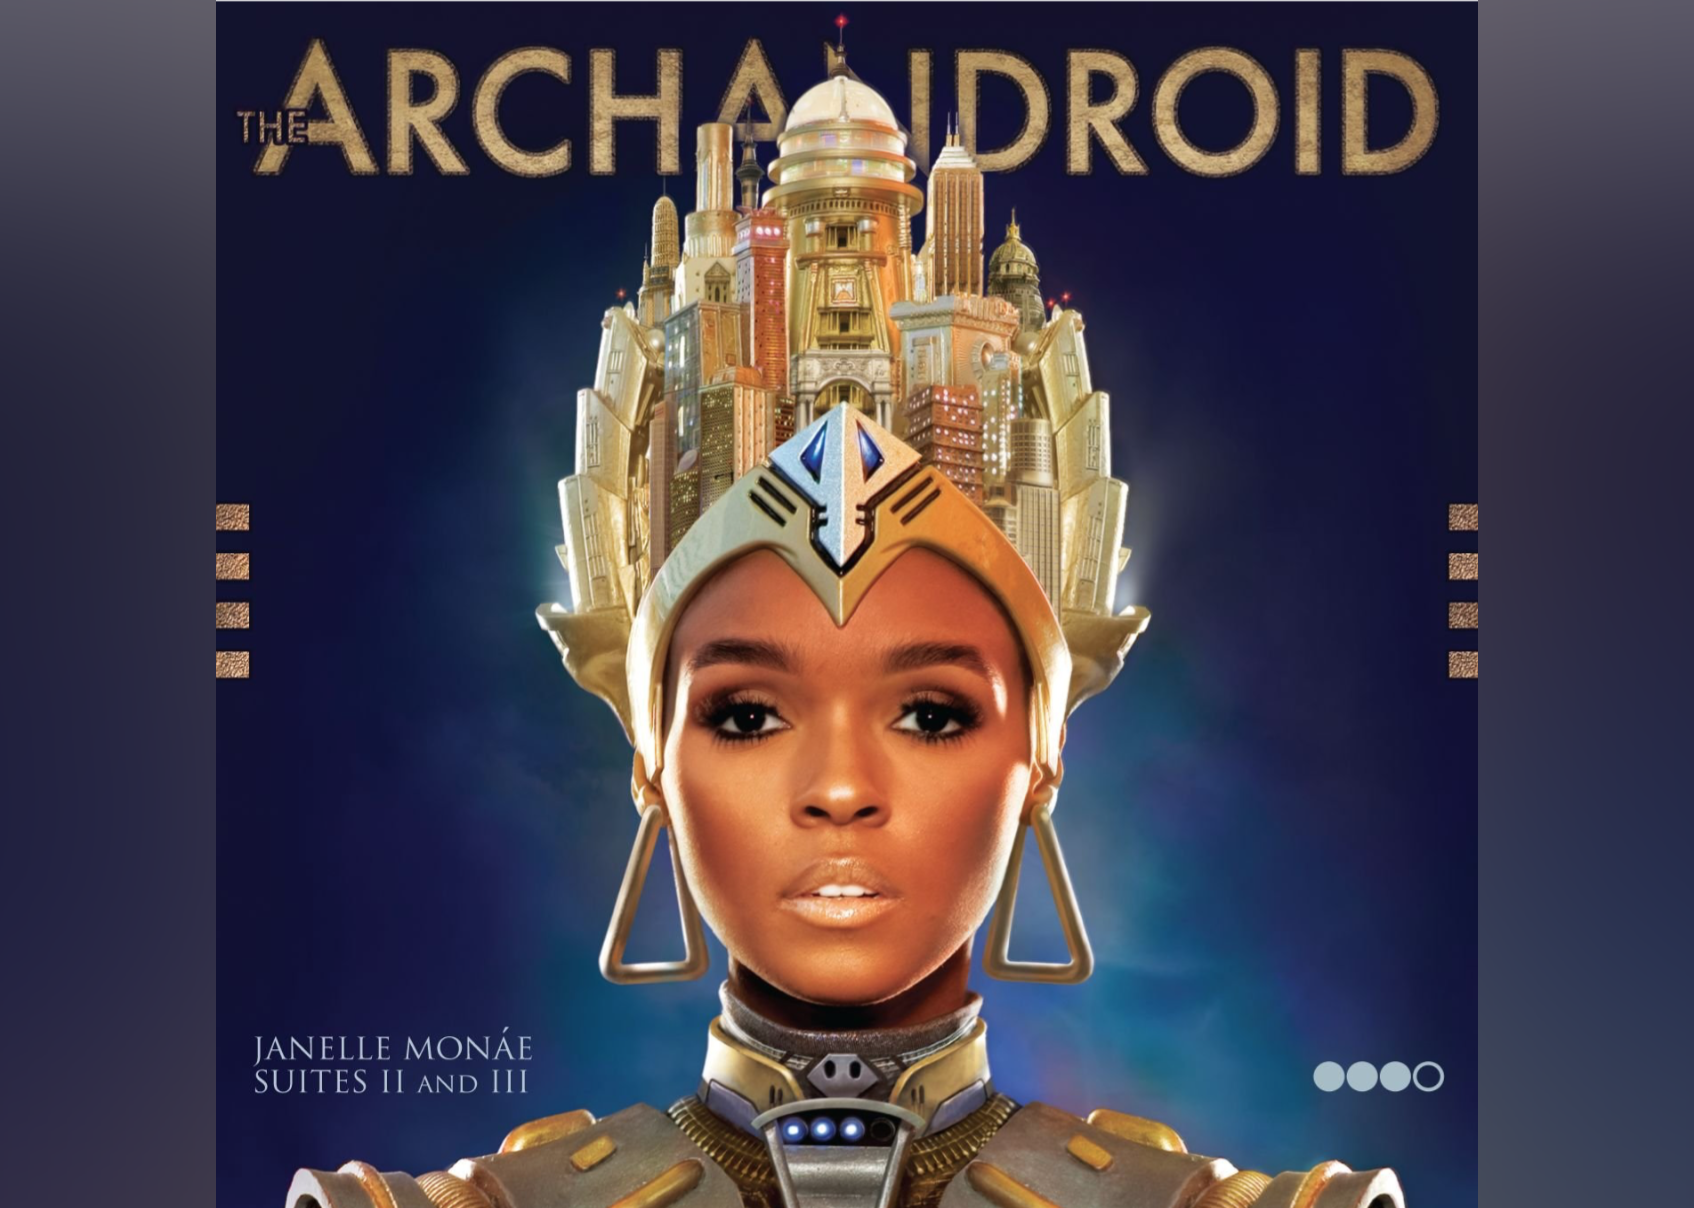 Janelle Monáe in front of a blue background wearing armor with a city emerging from the headpiece.